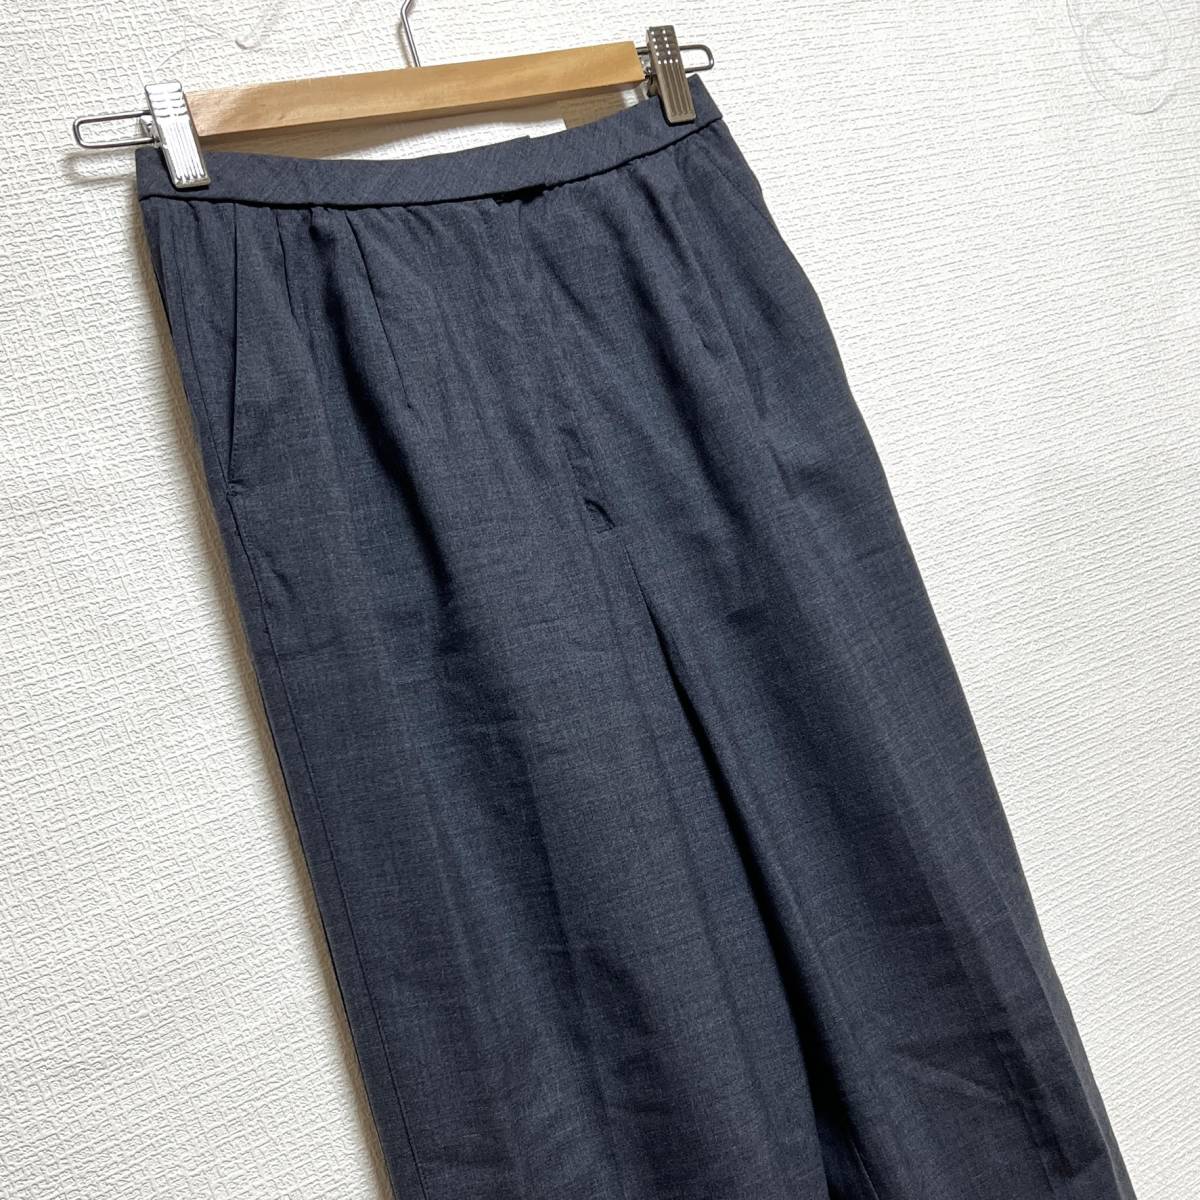  prompt decision Leilian Leilian lady's pants tiger bar do*to-nya cloth size 9 letter pack post service possible (835776)